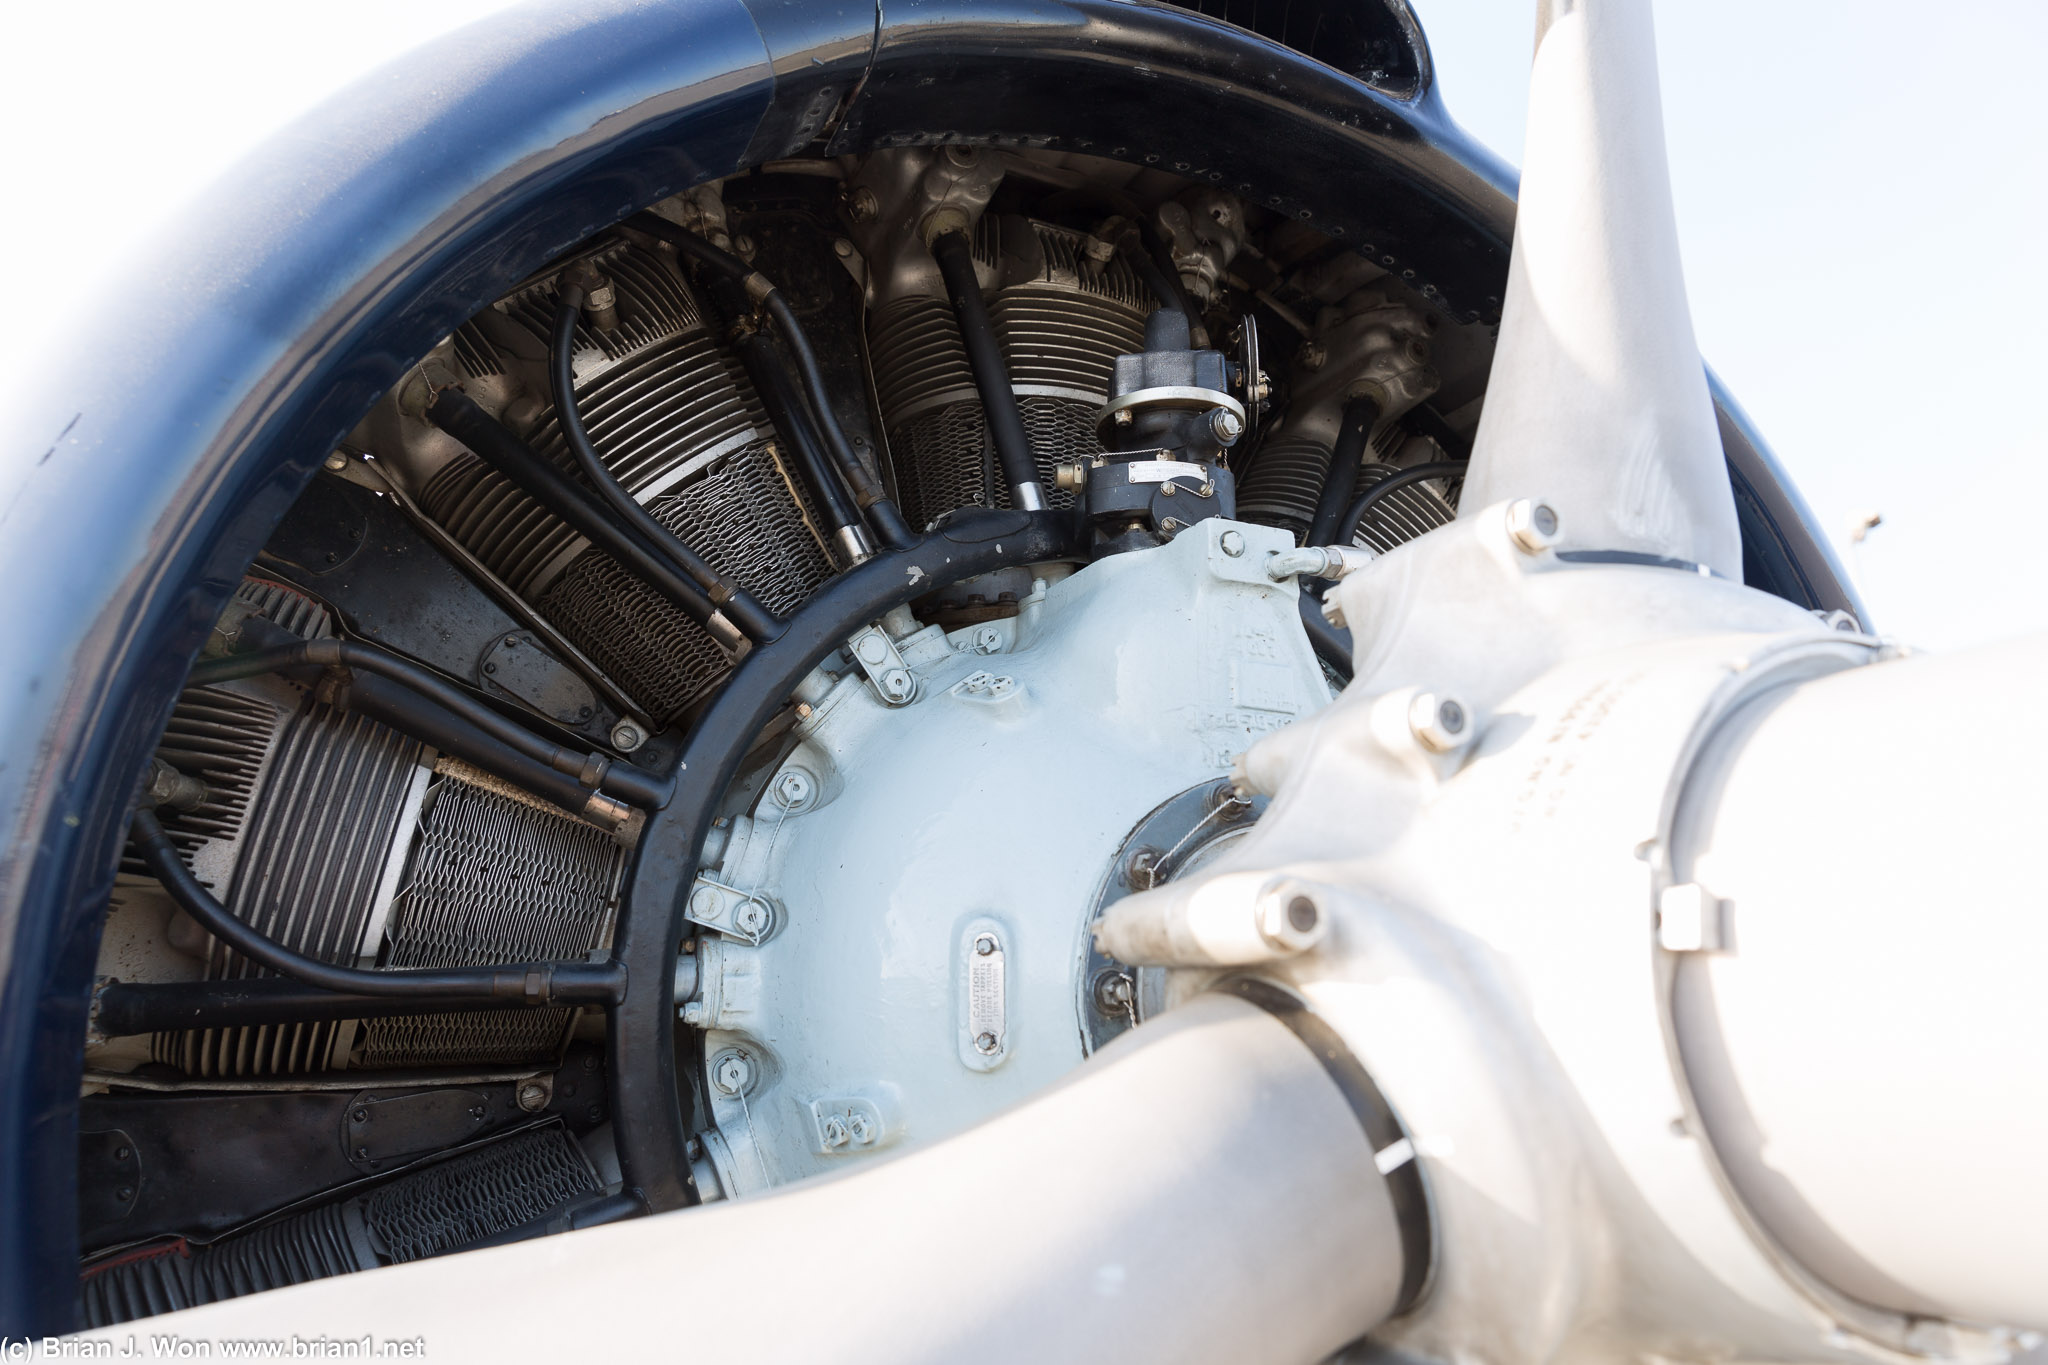 Close-up for the Wright R1820-9 Cyclone radial engine.